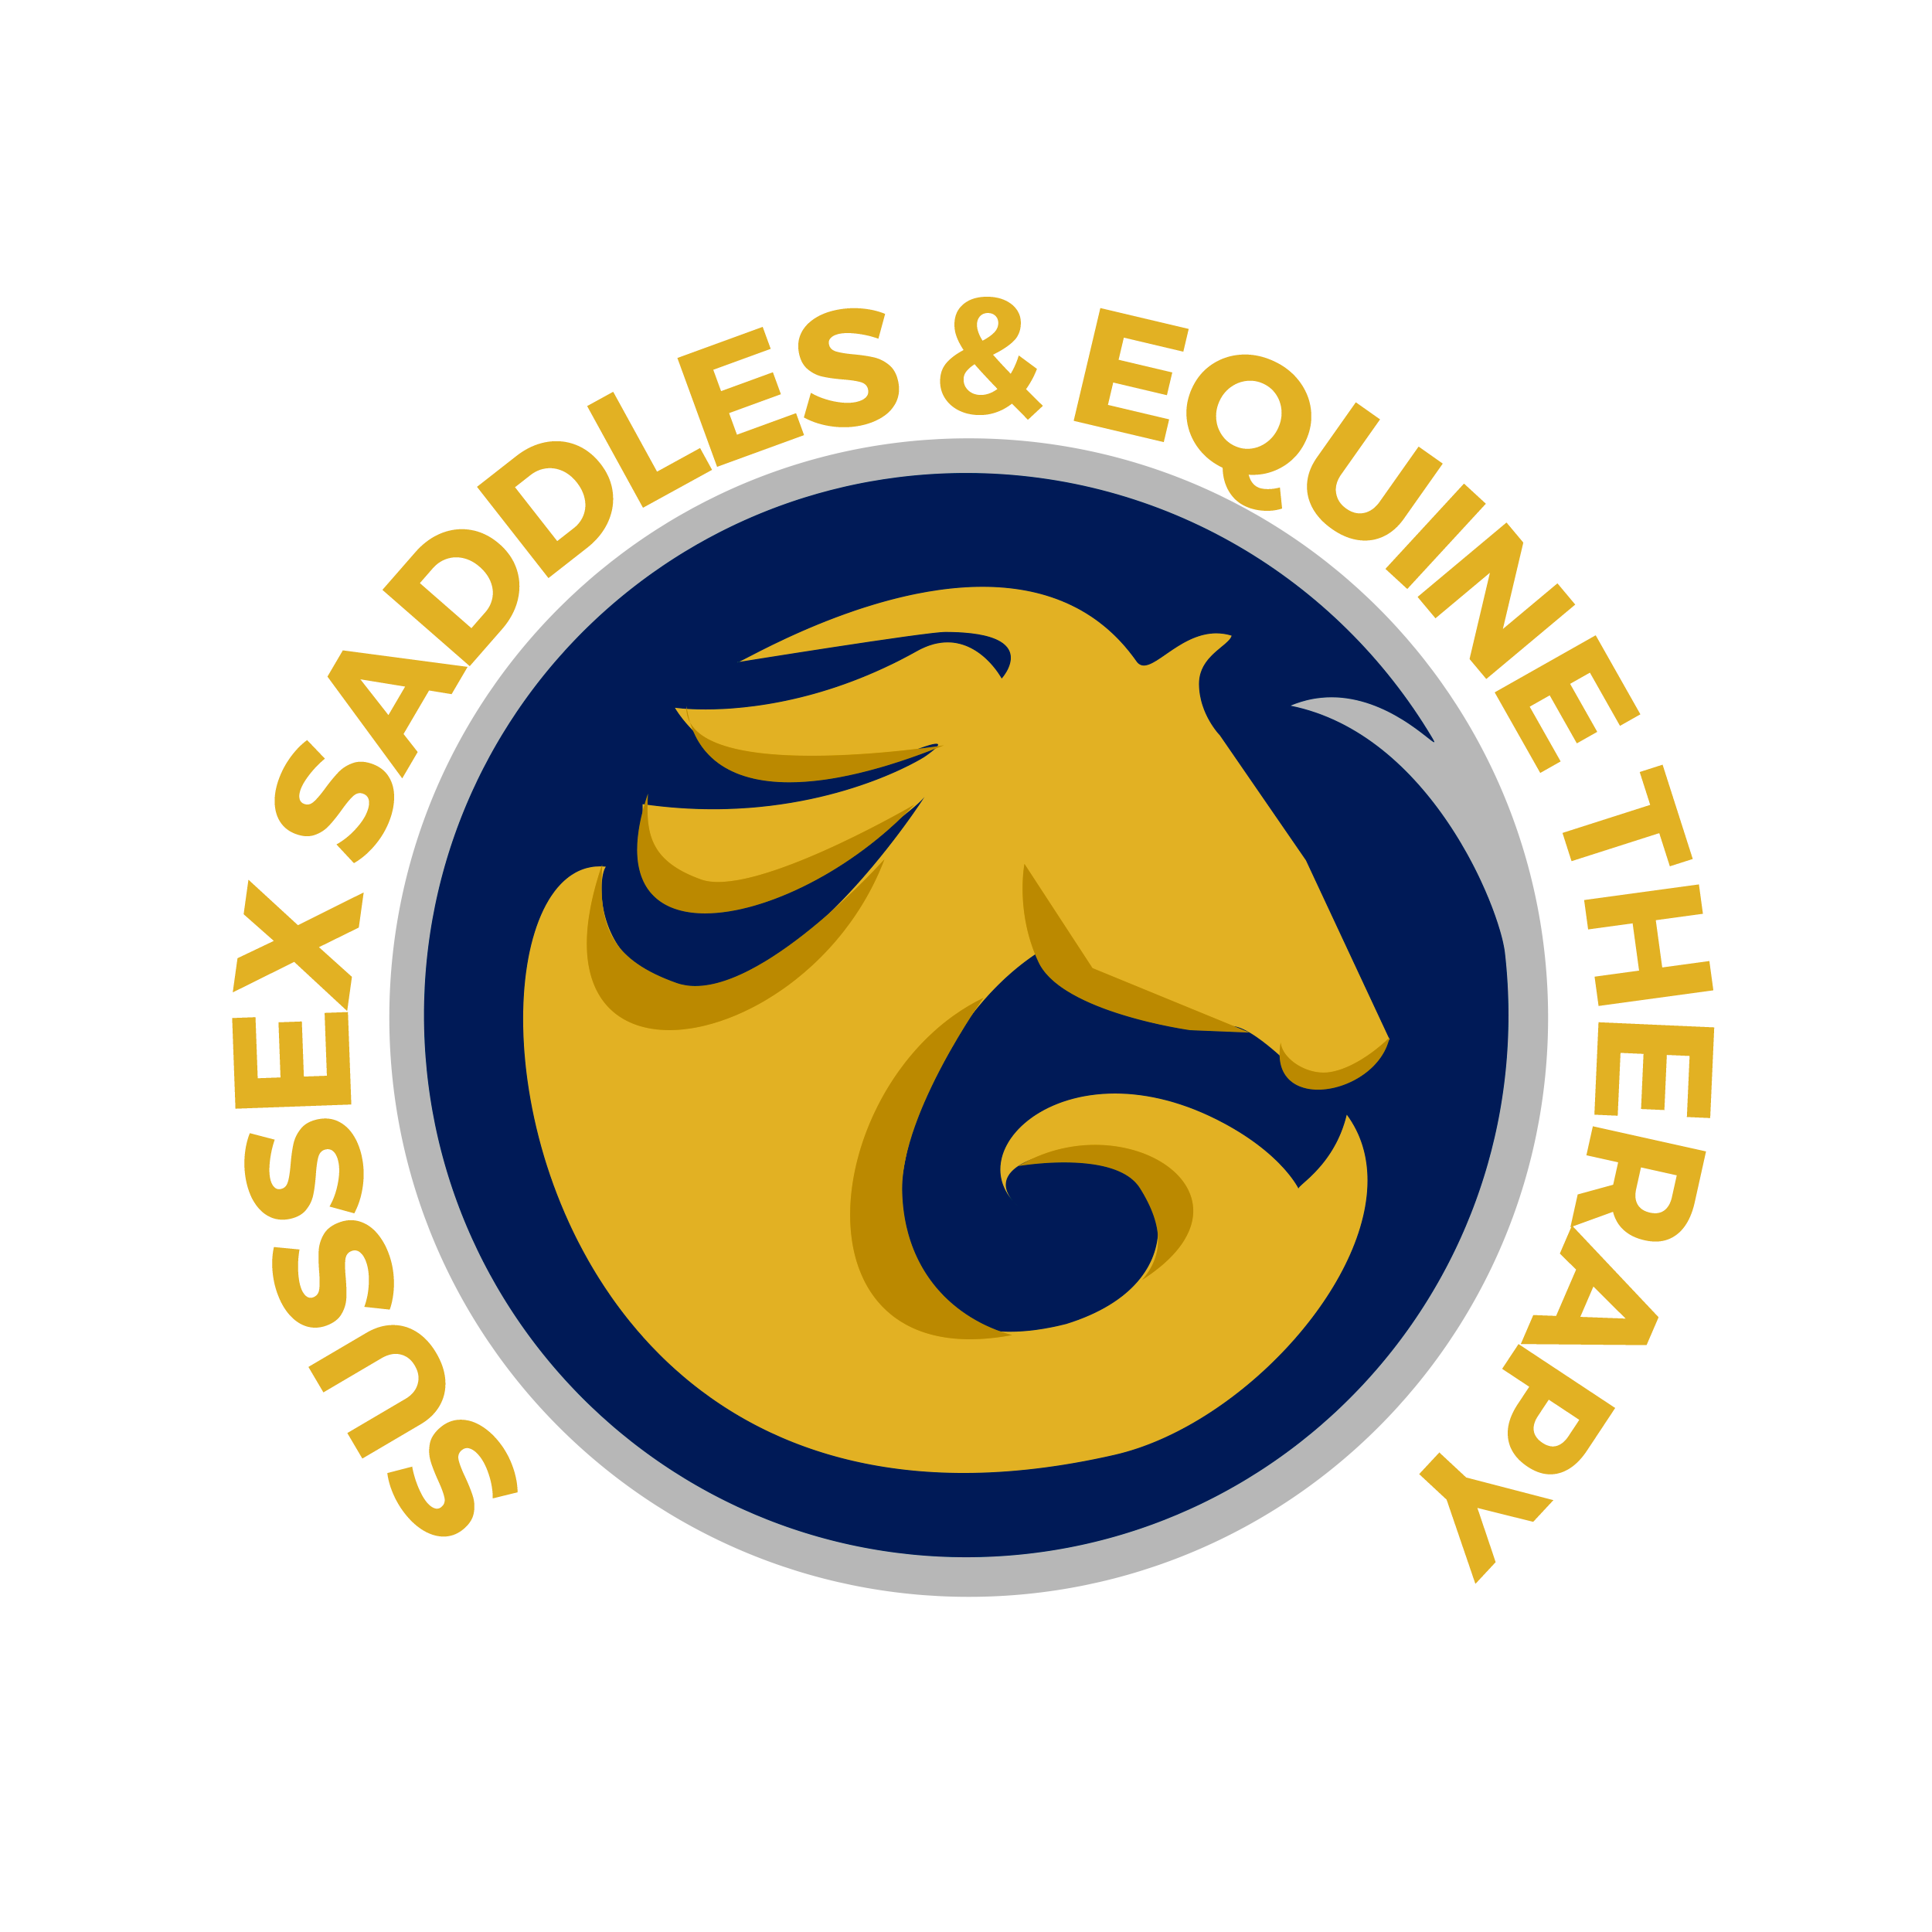 Sussex Saddles & Equine Therapy